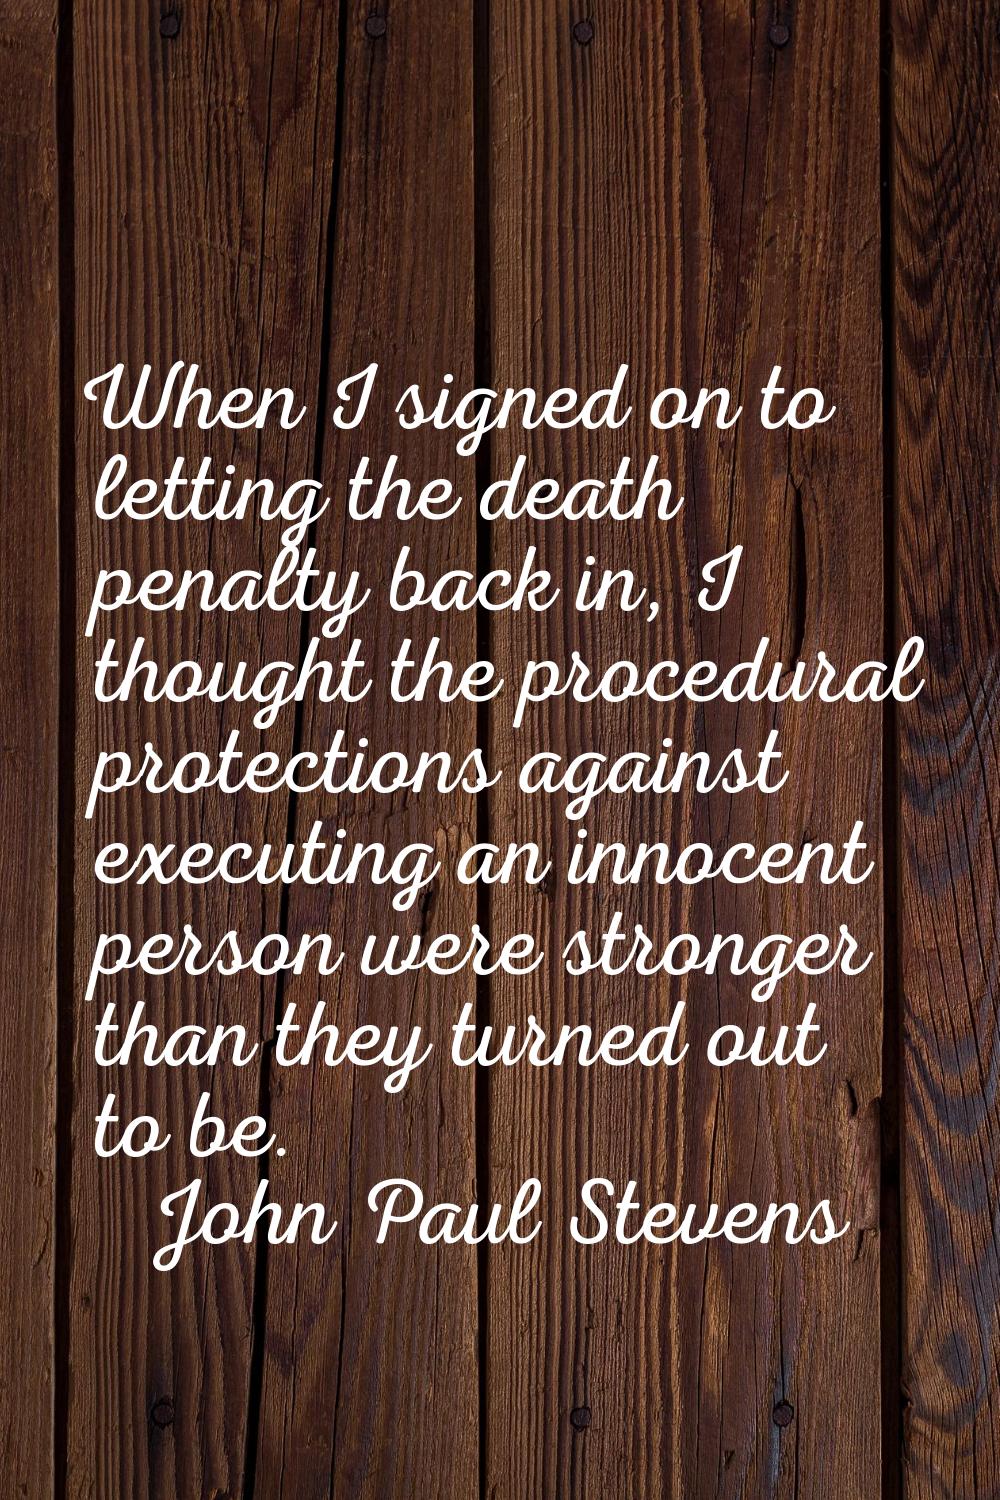 When I signed on to letting the death penalty back in, I thought the procedural protections against